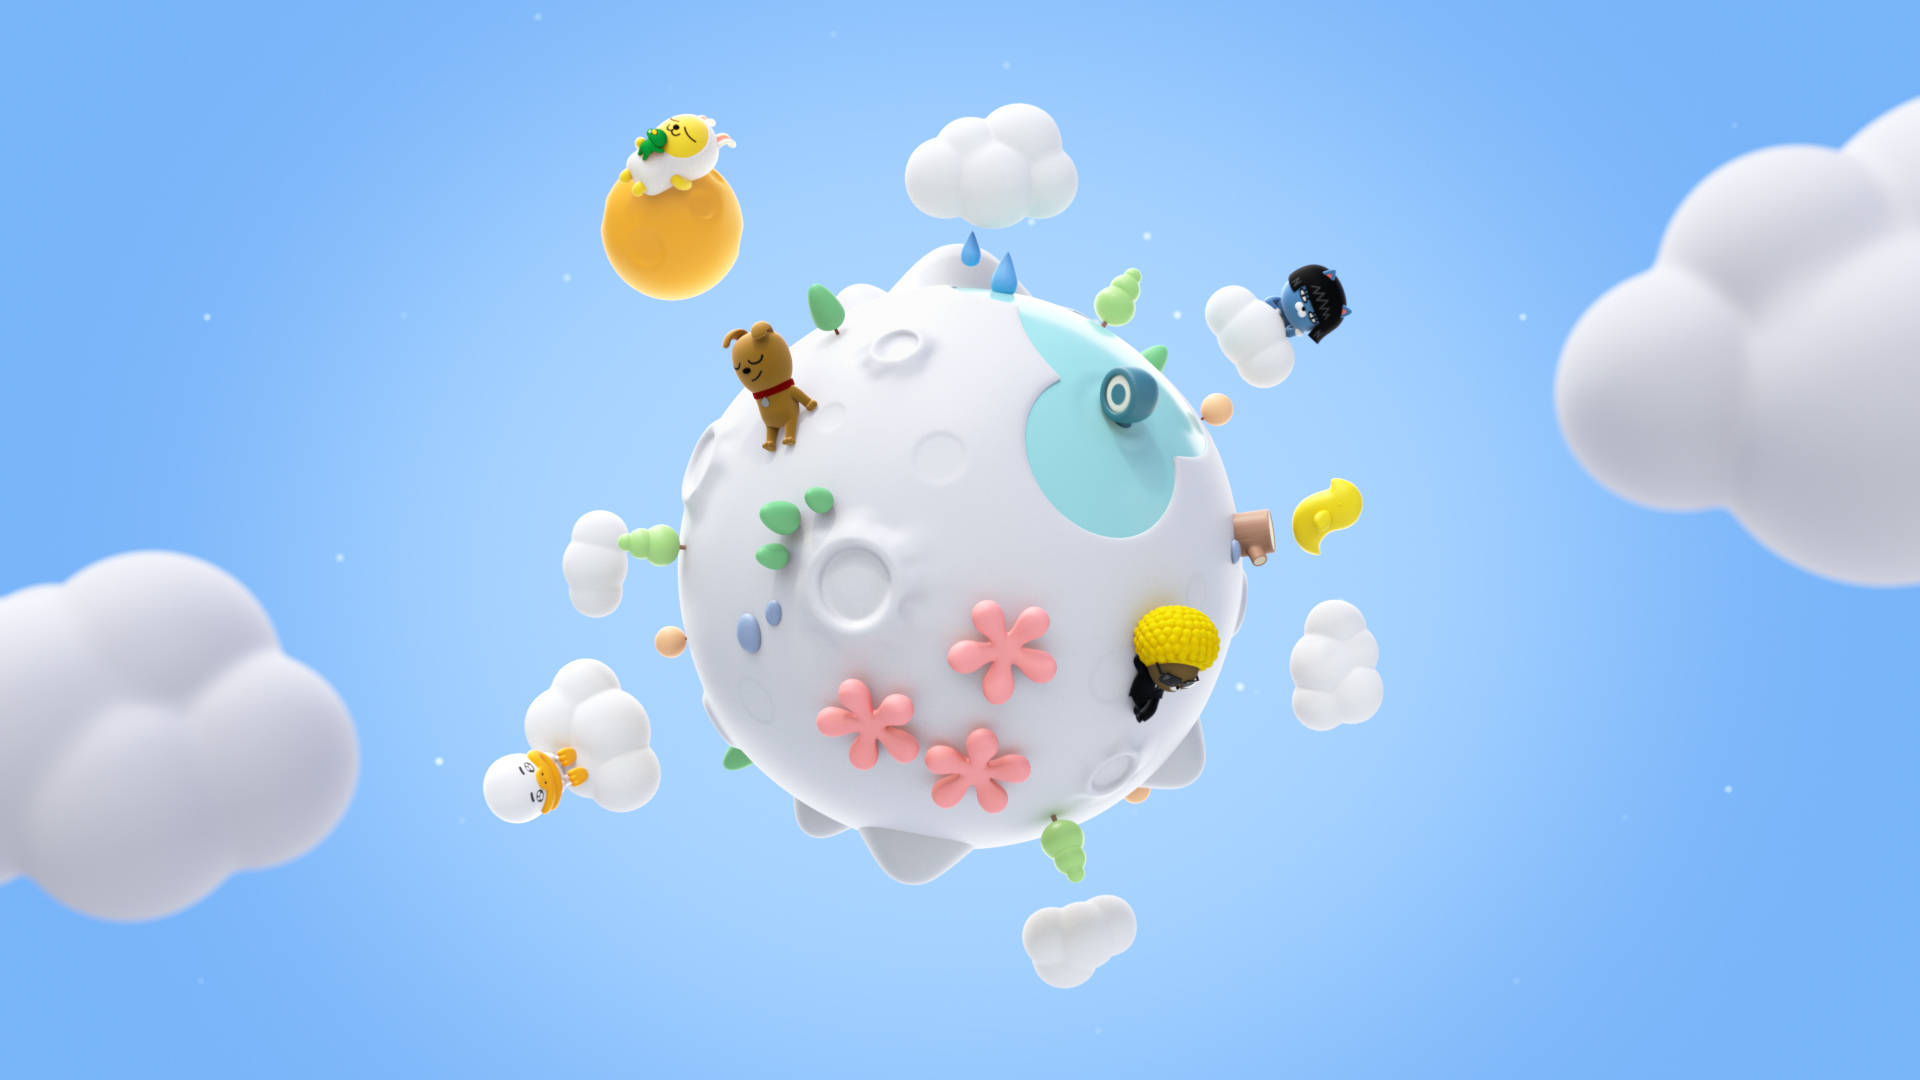 Kakao Friends In Clouds Background